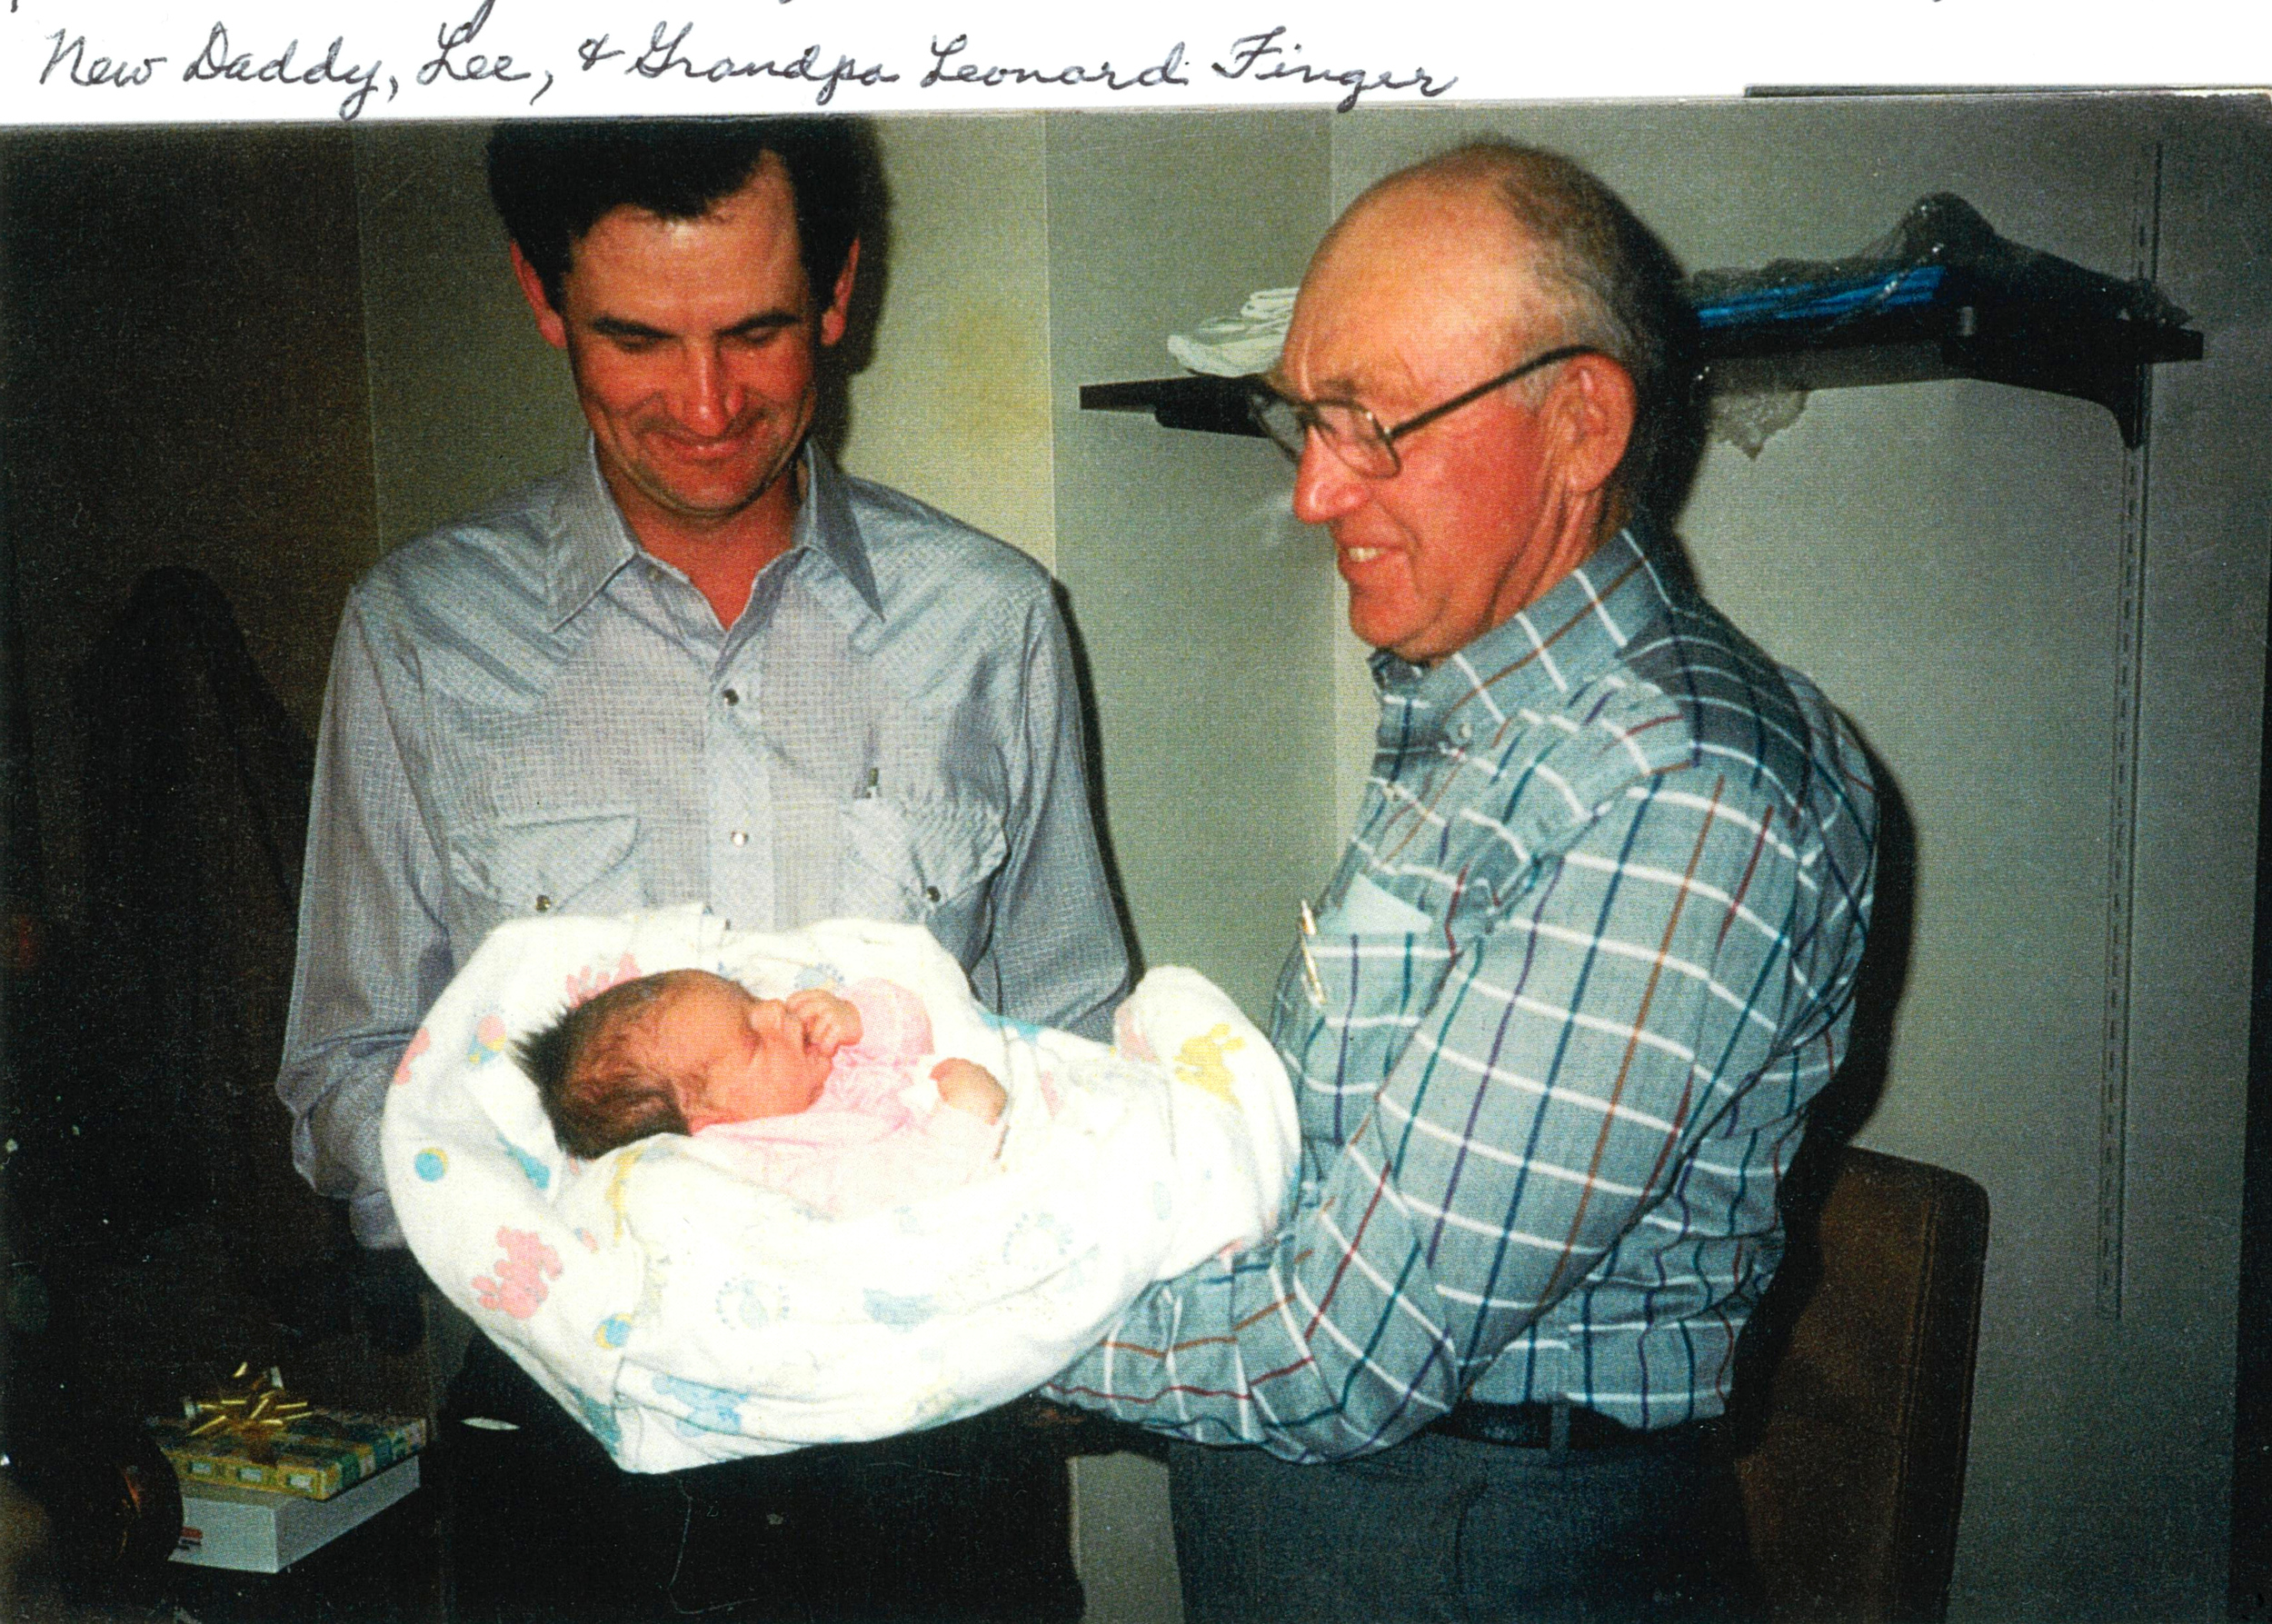 Baby Ann with daddy Lee and Grandpa Finger